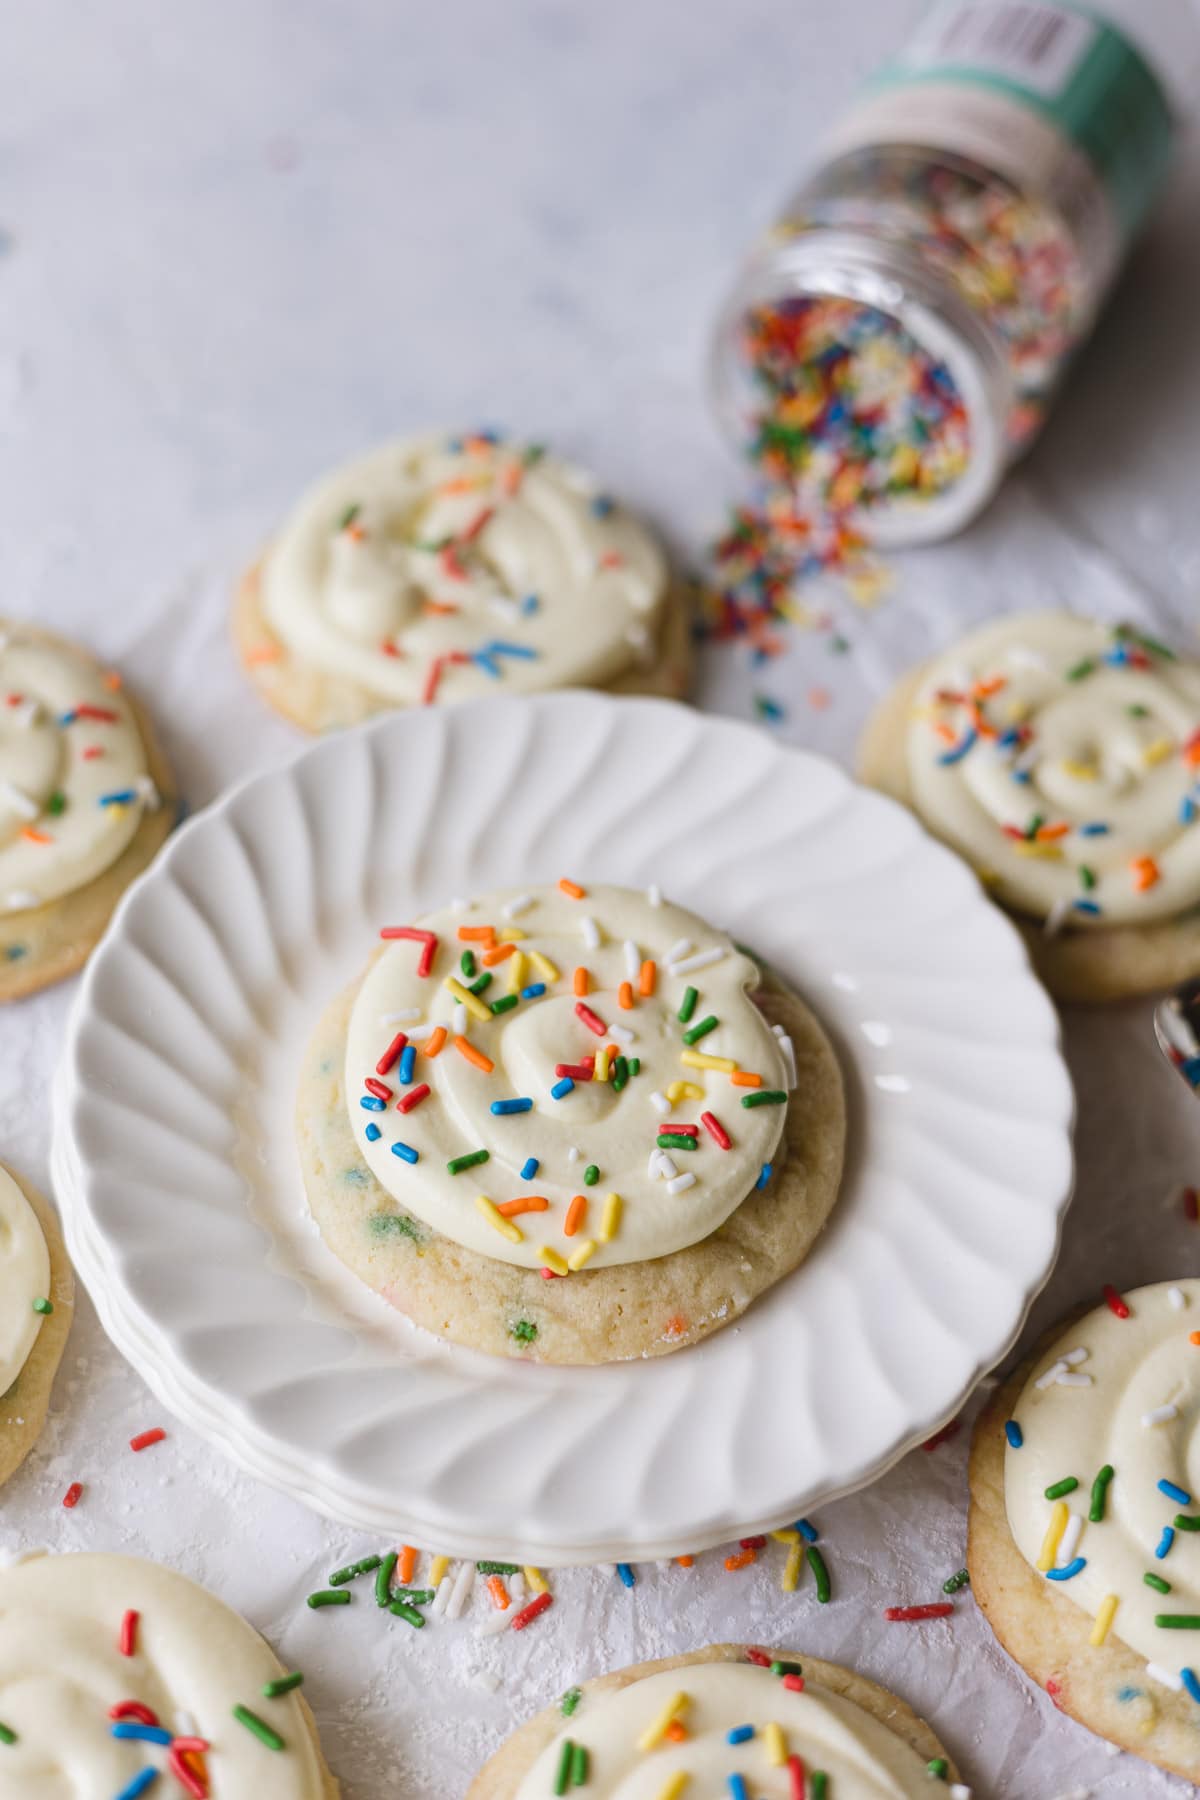 Frosted Funfetti cookies with more sprinkles on top.